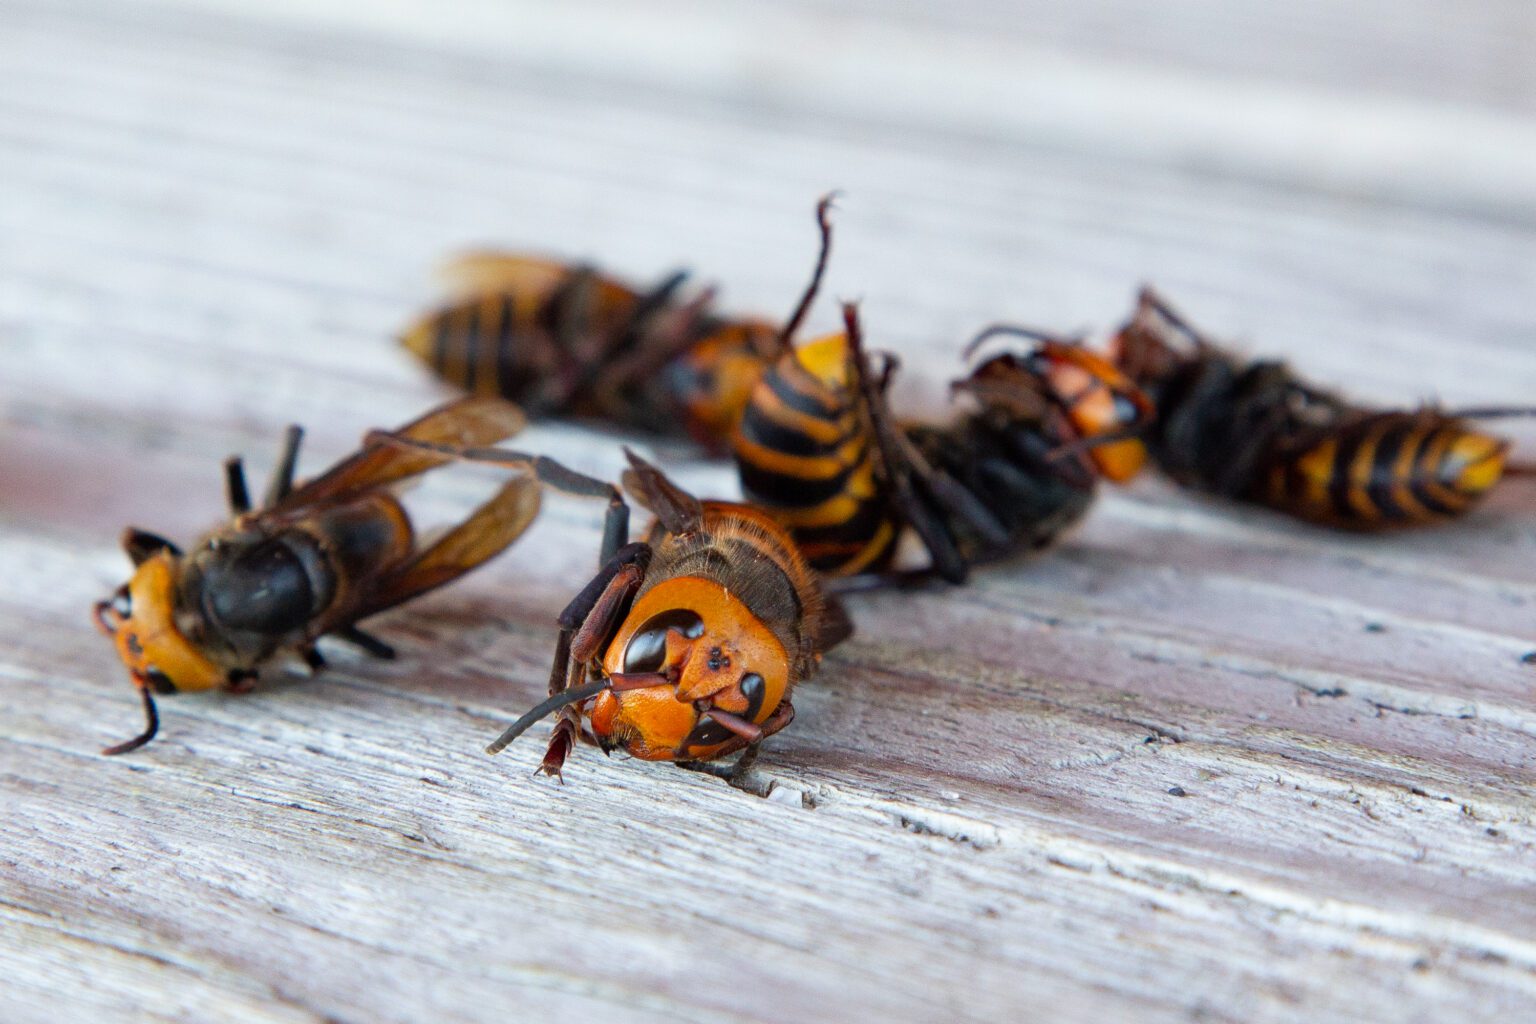 The Washington State Department of Agriculture displayed dead and preserved Northern giant hornets at their tracking and trapping training session in Blaine on July 12.